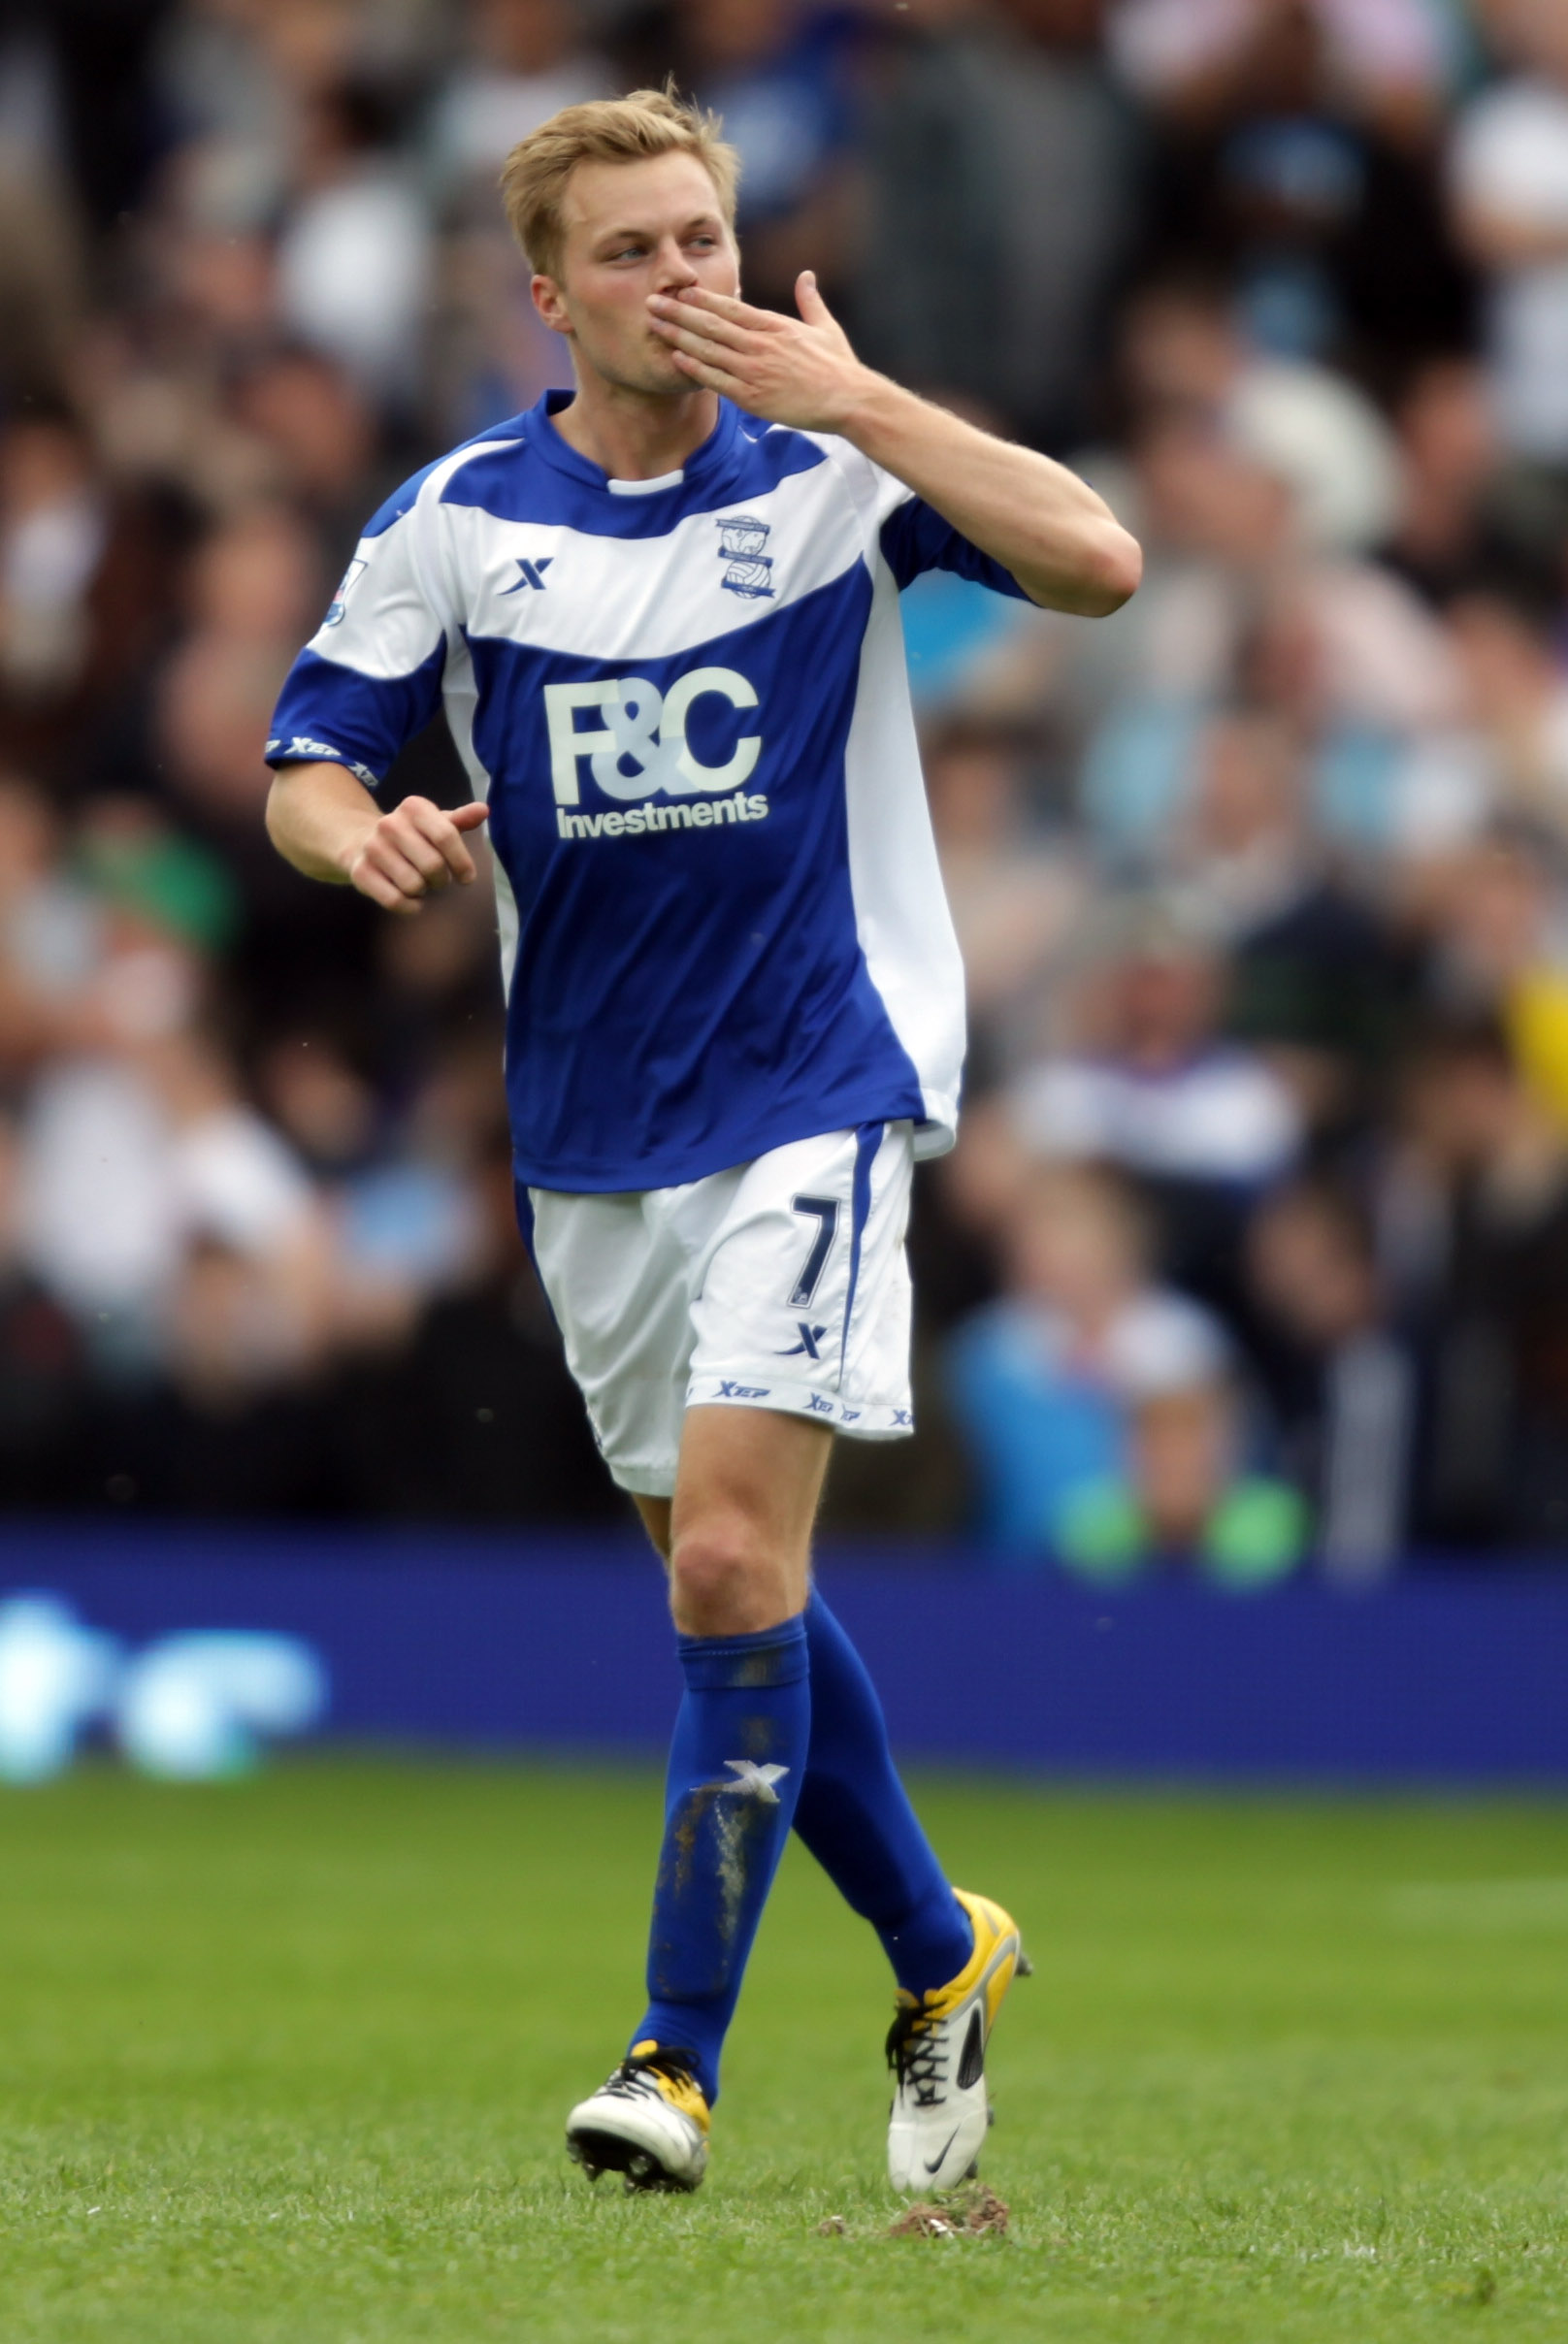 BIRMINGHAM, ENGLAND - APRIL 16:  Sebastian Larsson of Birmingham celebrates after scoring the first goal during the Barclays Premier League match between Birmingham City and Sunderland at St Andrew's on April 16, 2011 in Birmingham, England.  (Photo by Ro